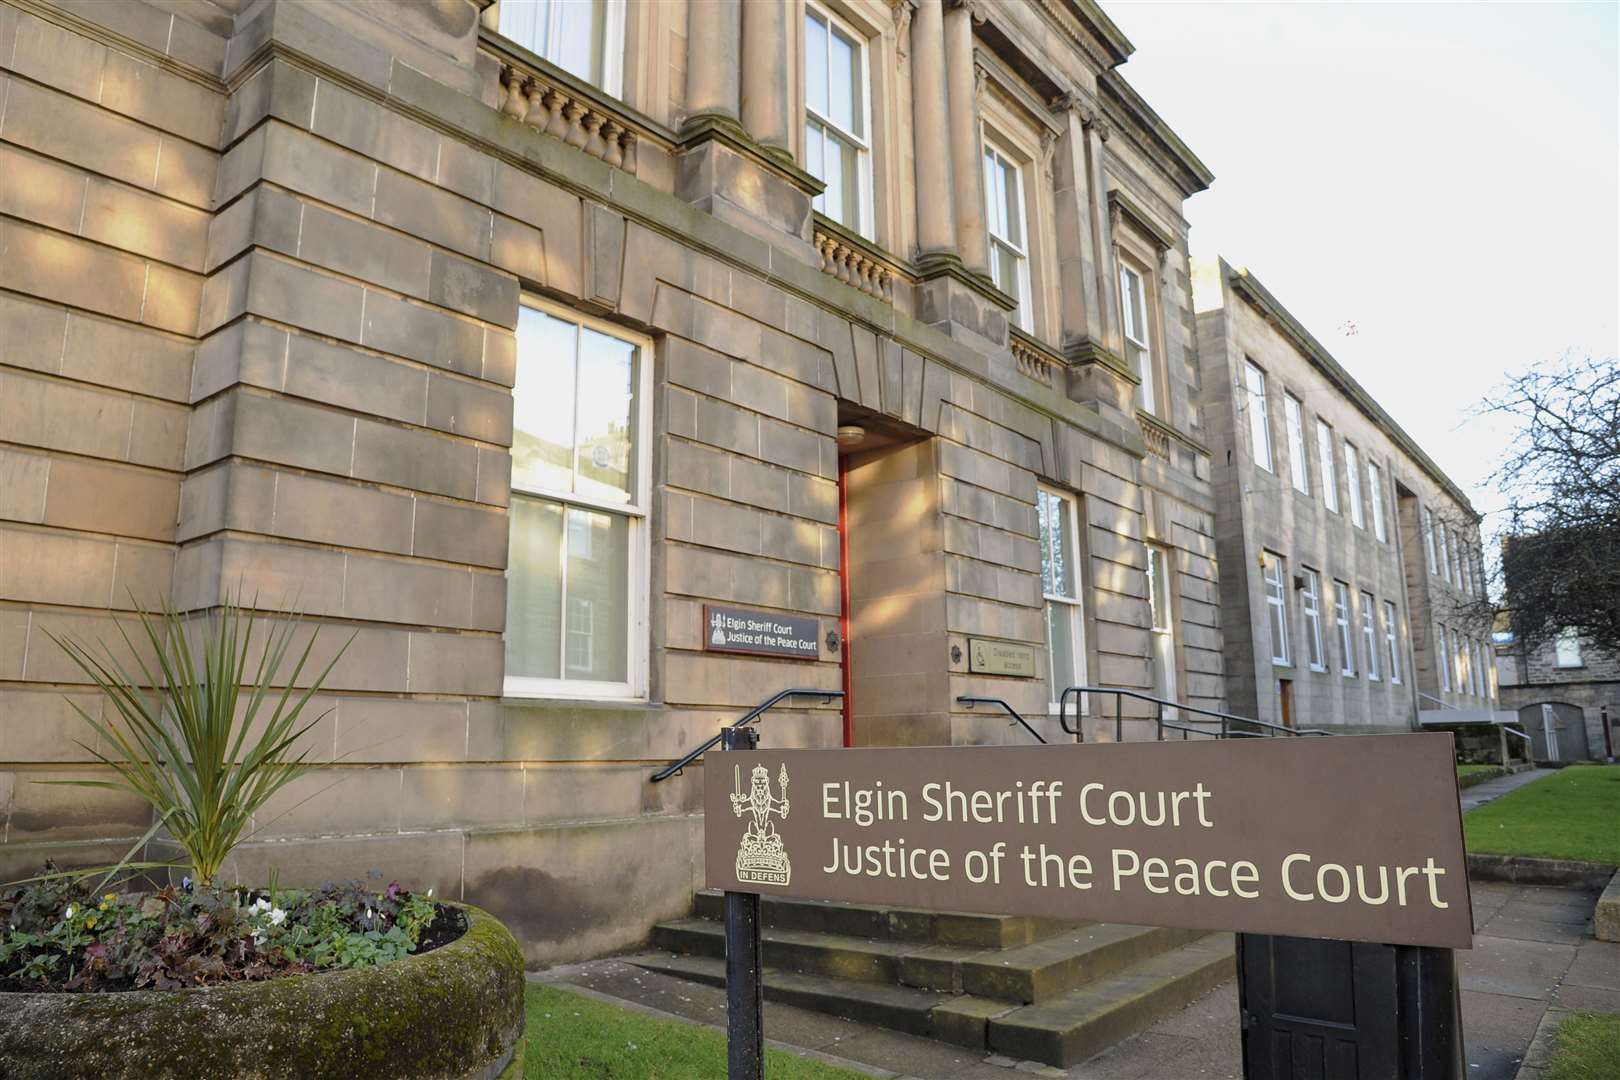 Jay Mackintosh, who has lived in Forres, appeared via a video link at Elgin Sheriff Court today.